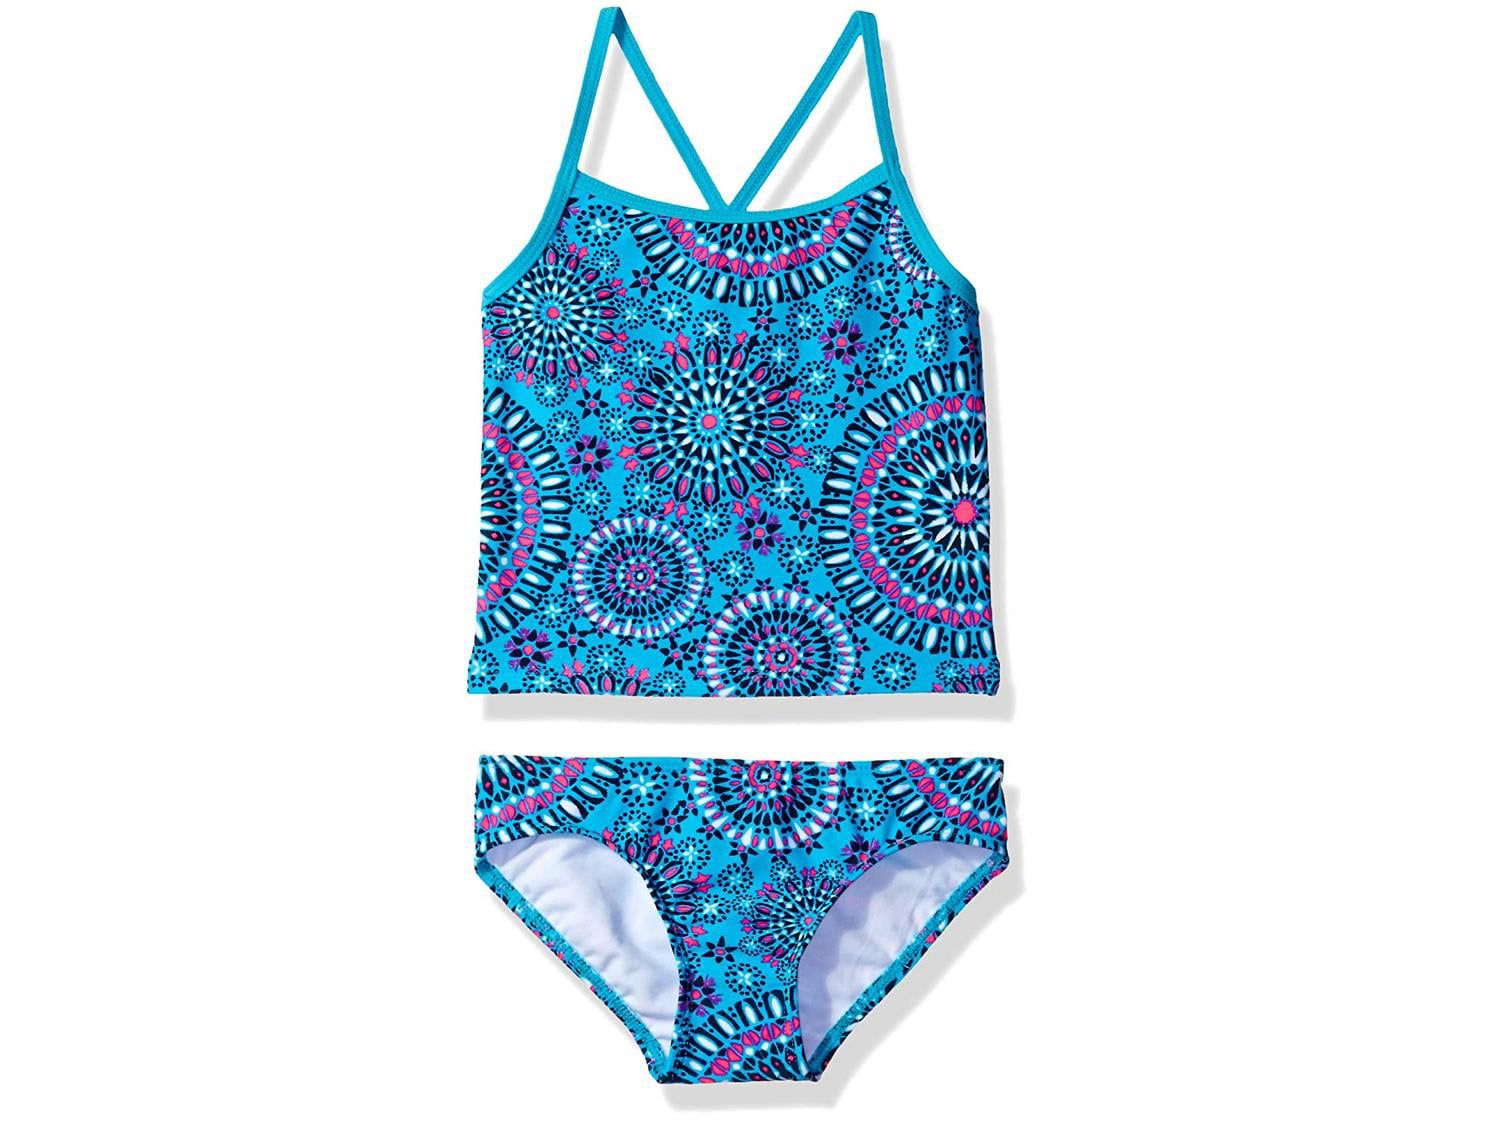 Kanu Surf Girls Alania Floral Banded Tankini Beach Sport 2-Piece Swimsuit Two Piece Swimsuit